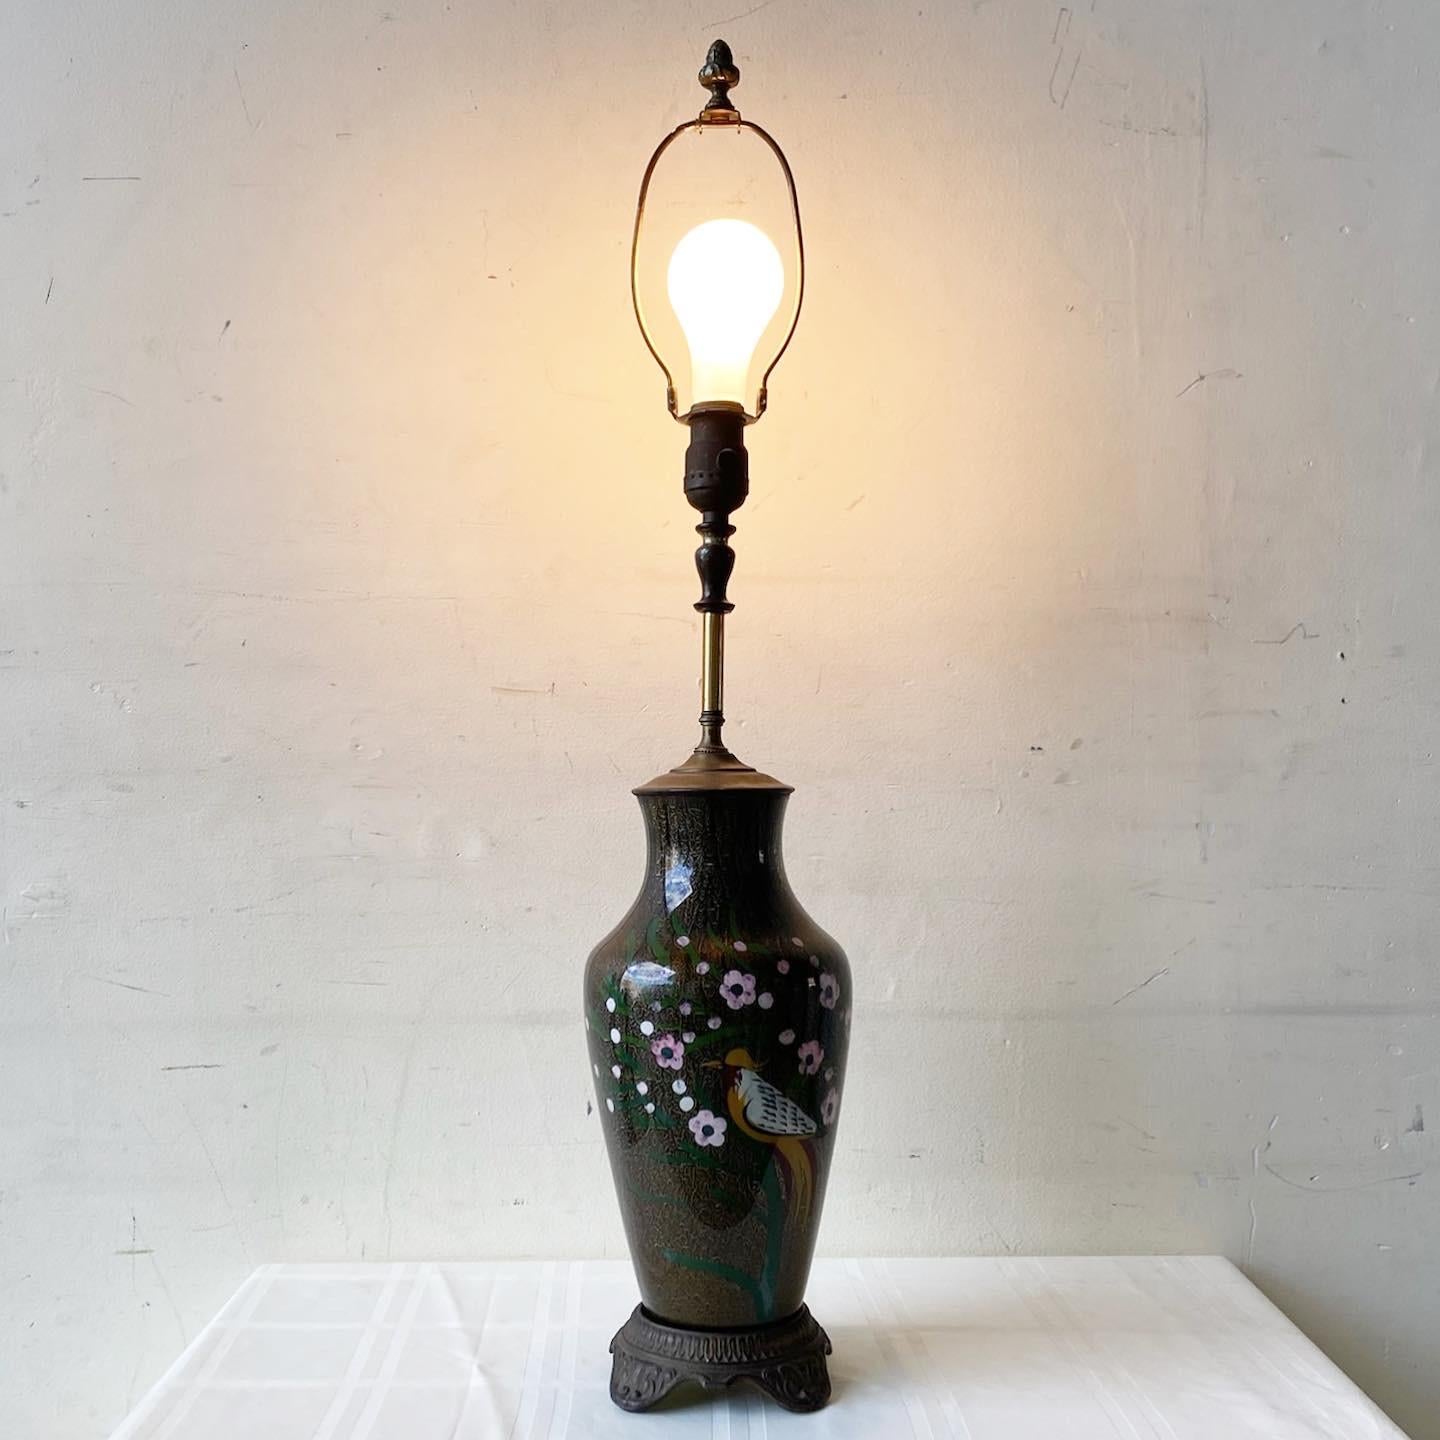 Amazing vintage asian table lamp. Features a hand painted porcelain body with brass accents.